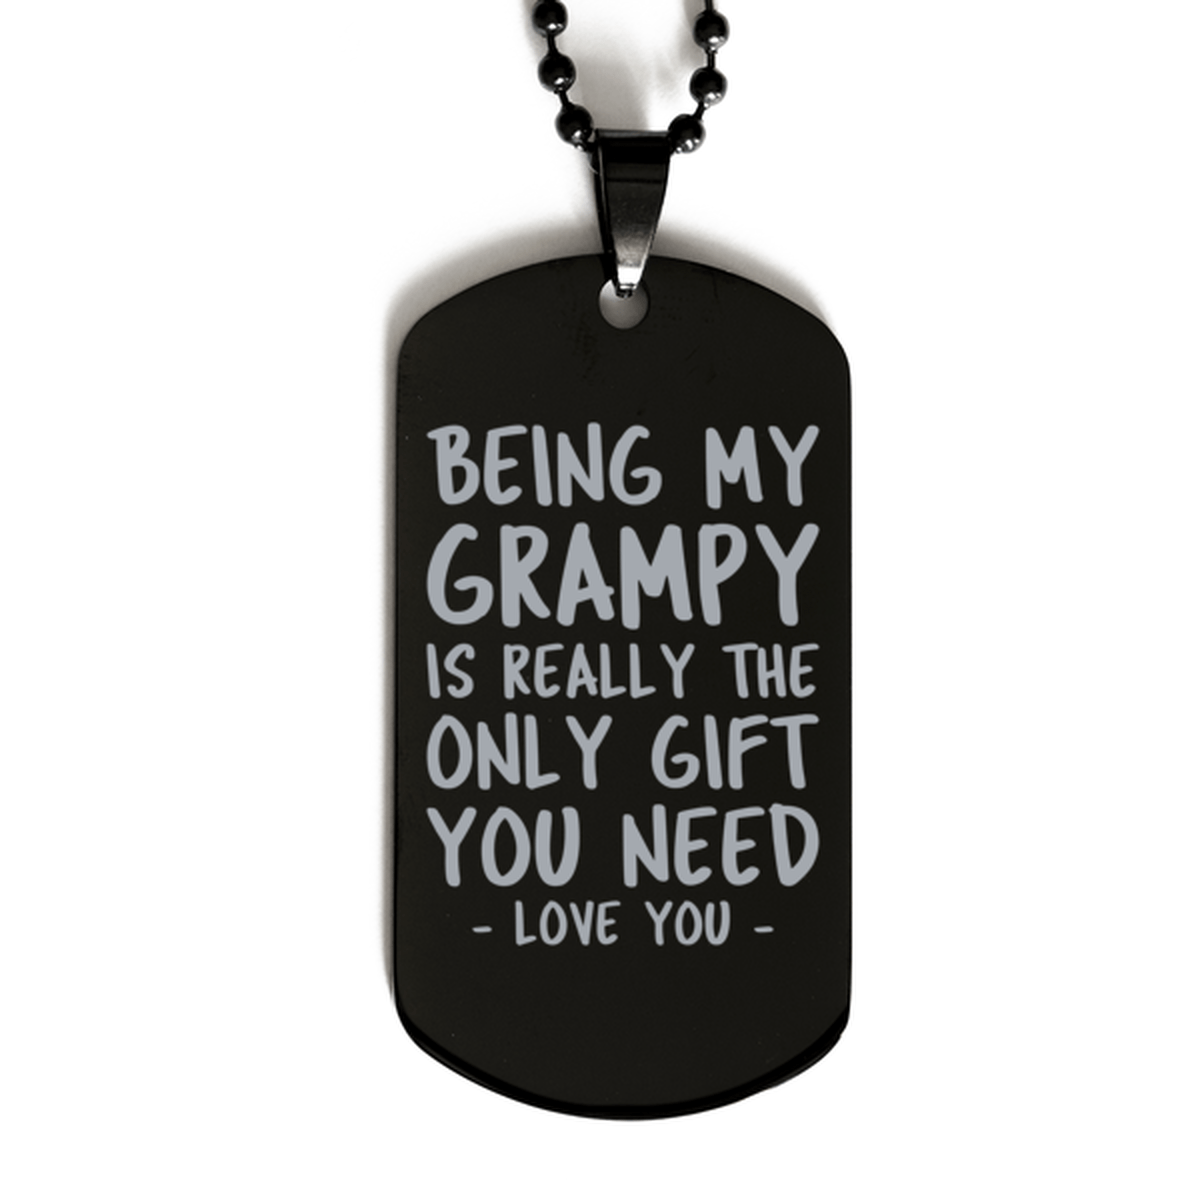 Funny Grampy Black Dog Tag Necklace, Being My Grampy Is Really the Only Gift You Need, Best Birthday Gifts for Grampy